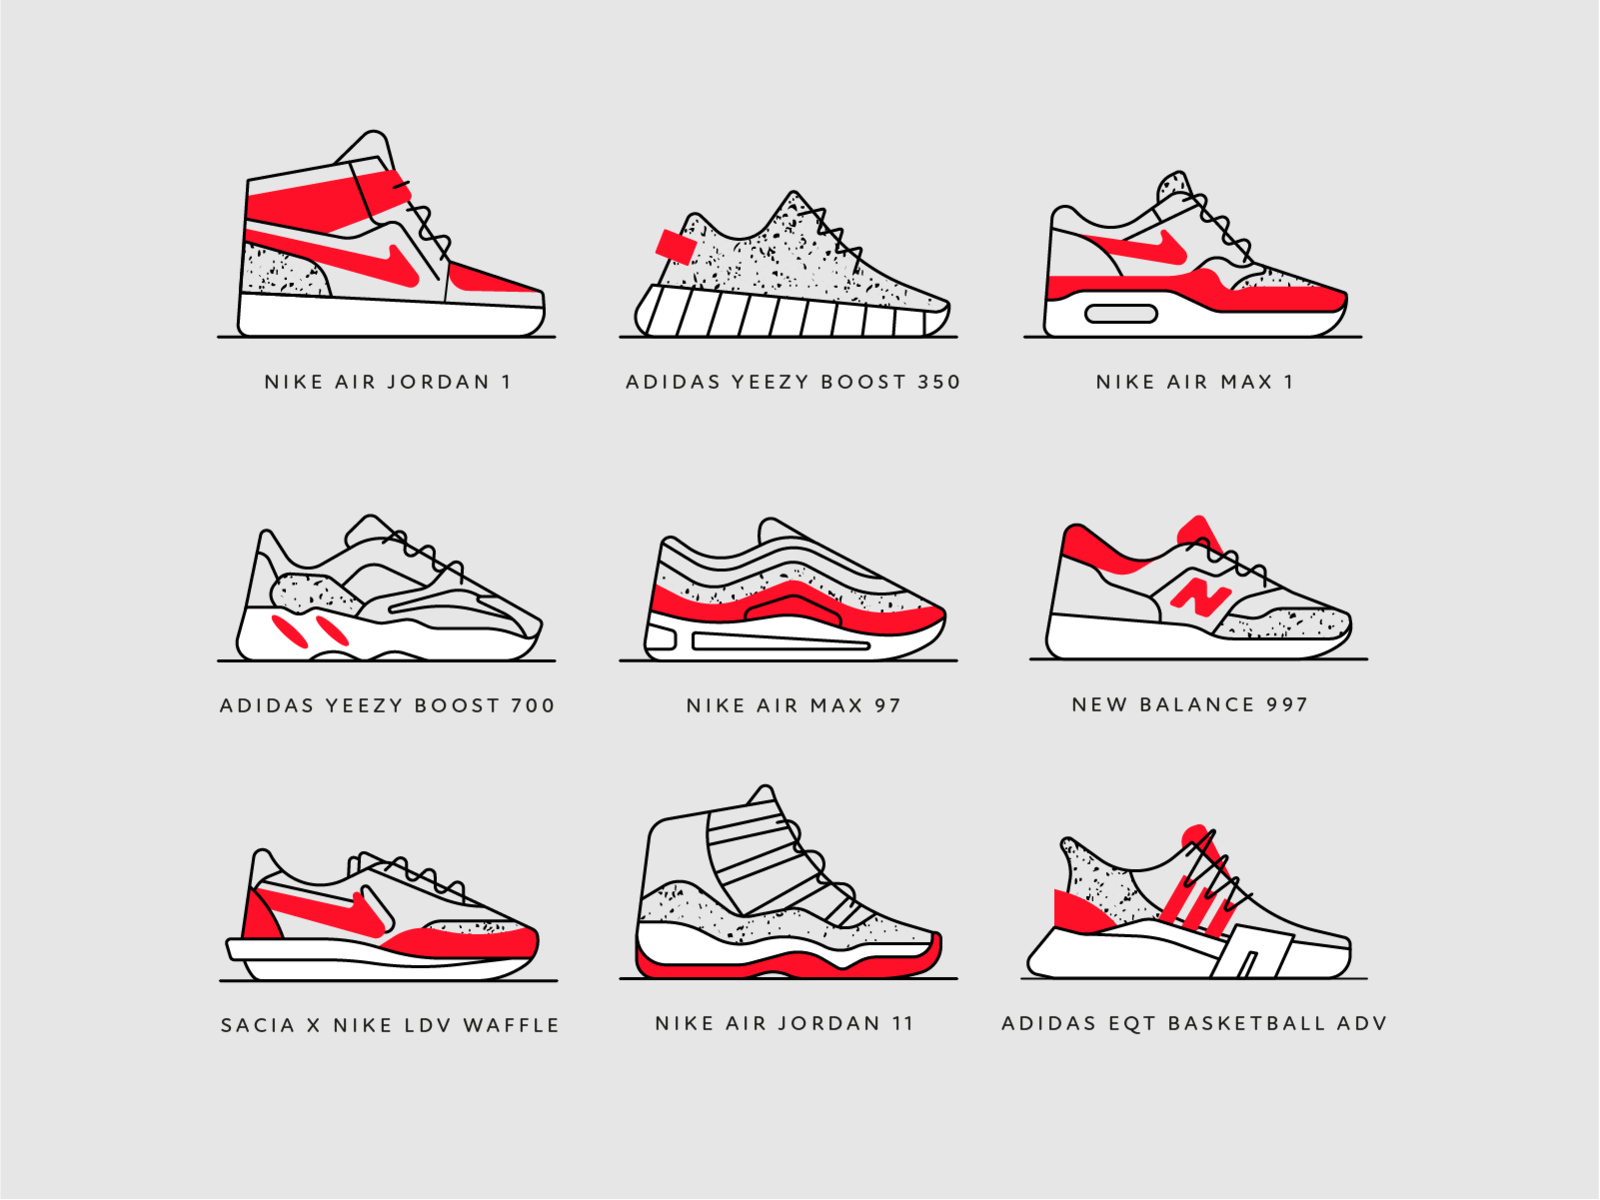 Set of sneakers by Eduards Balodis on Dribbble